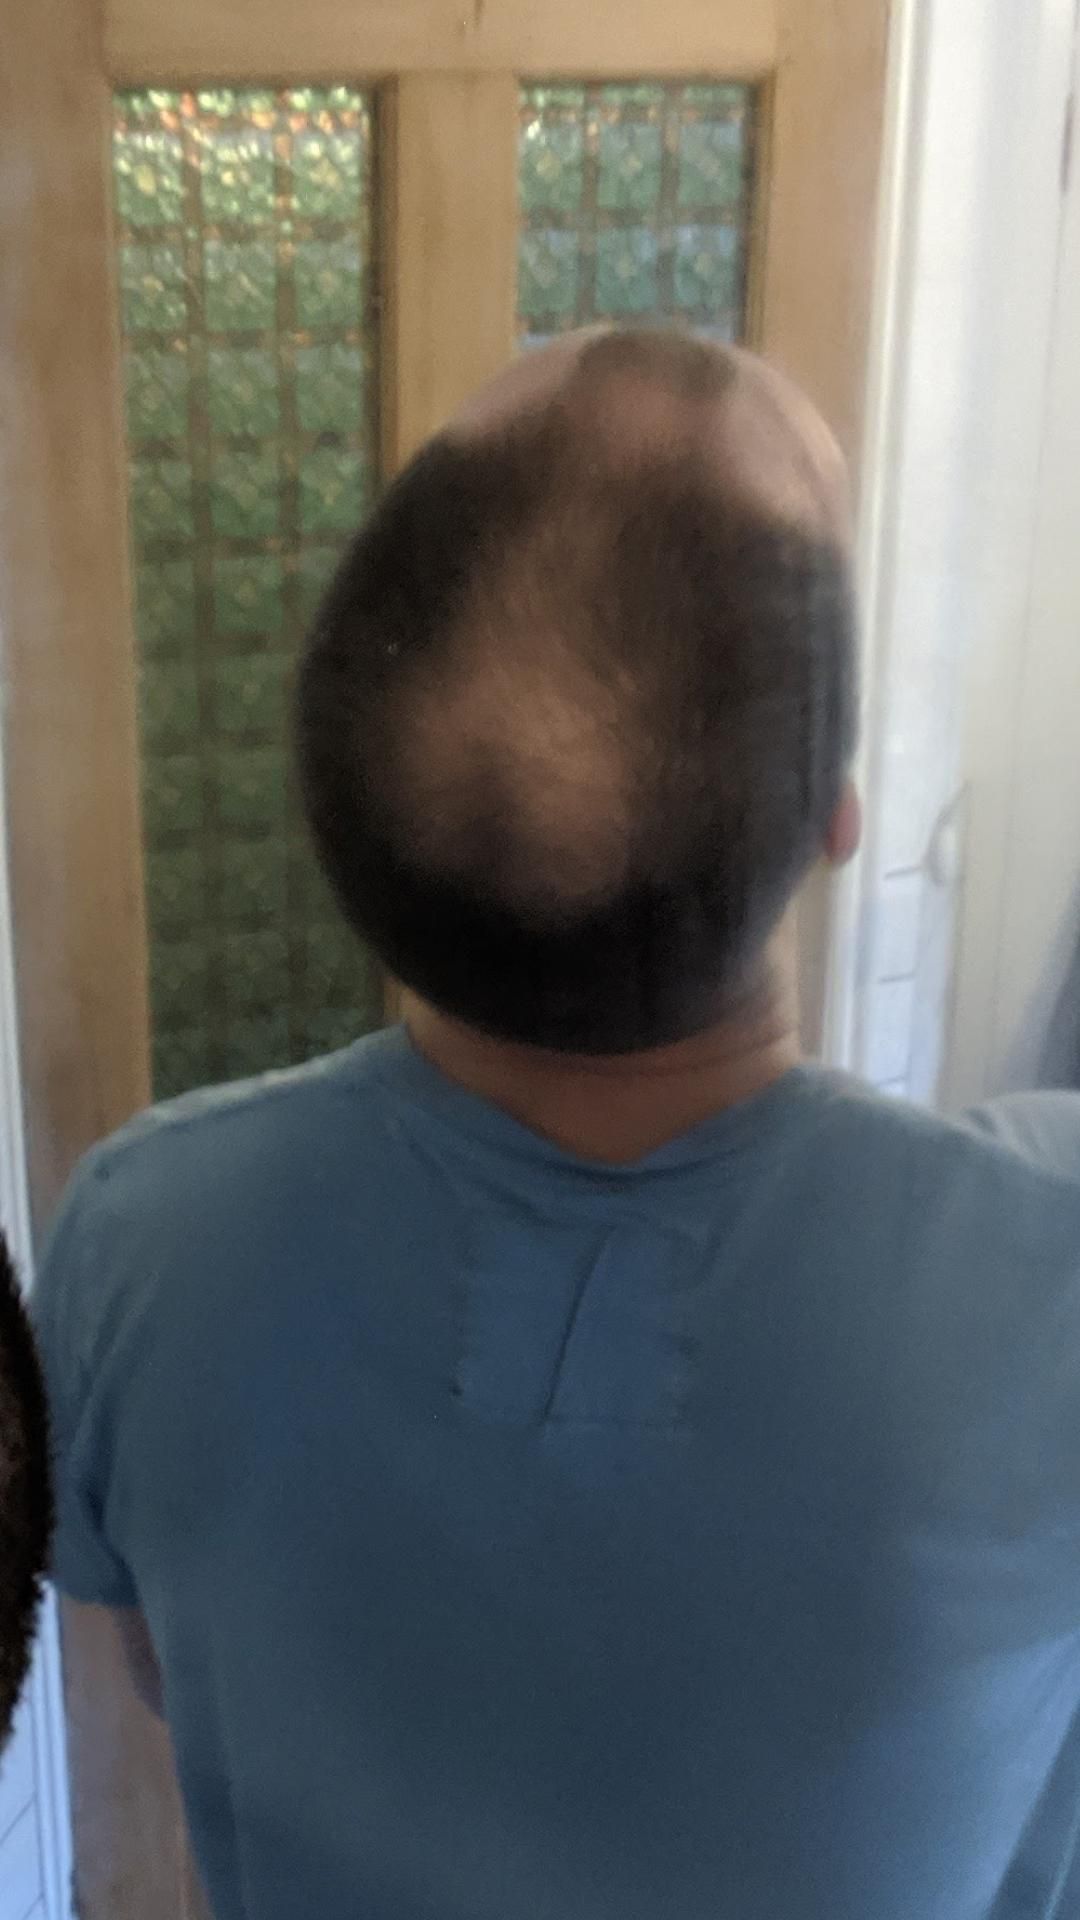 My bald spot is shaped like a *** and balls